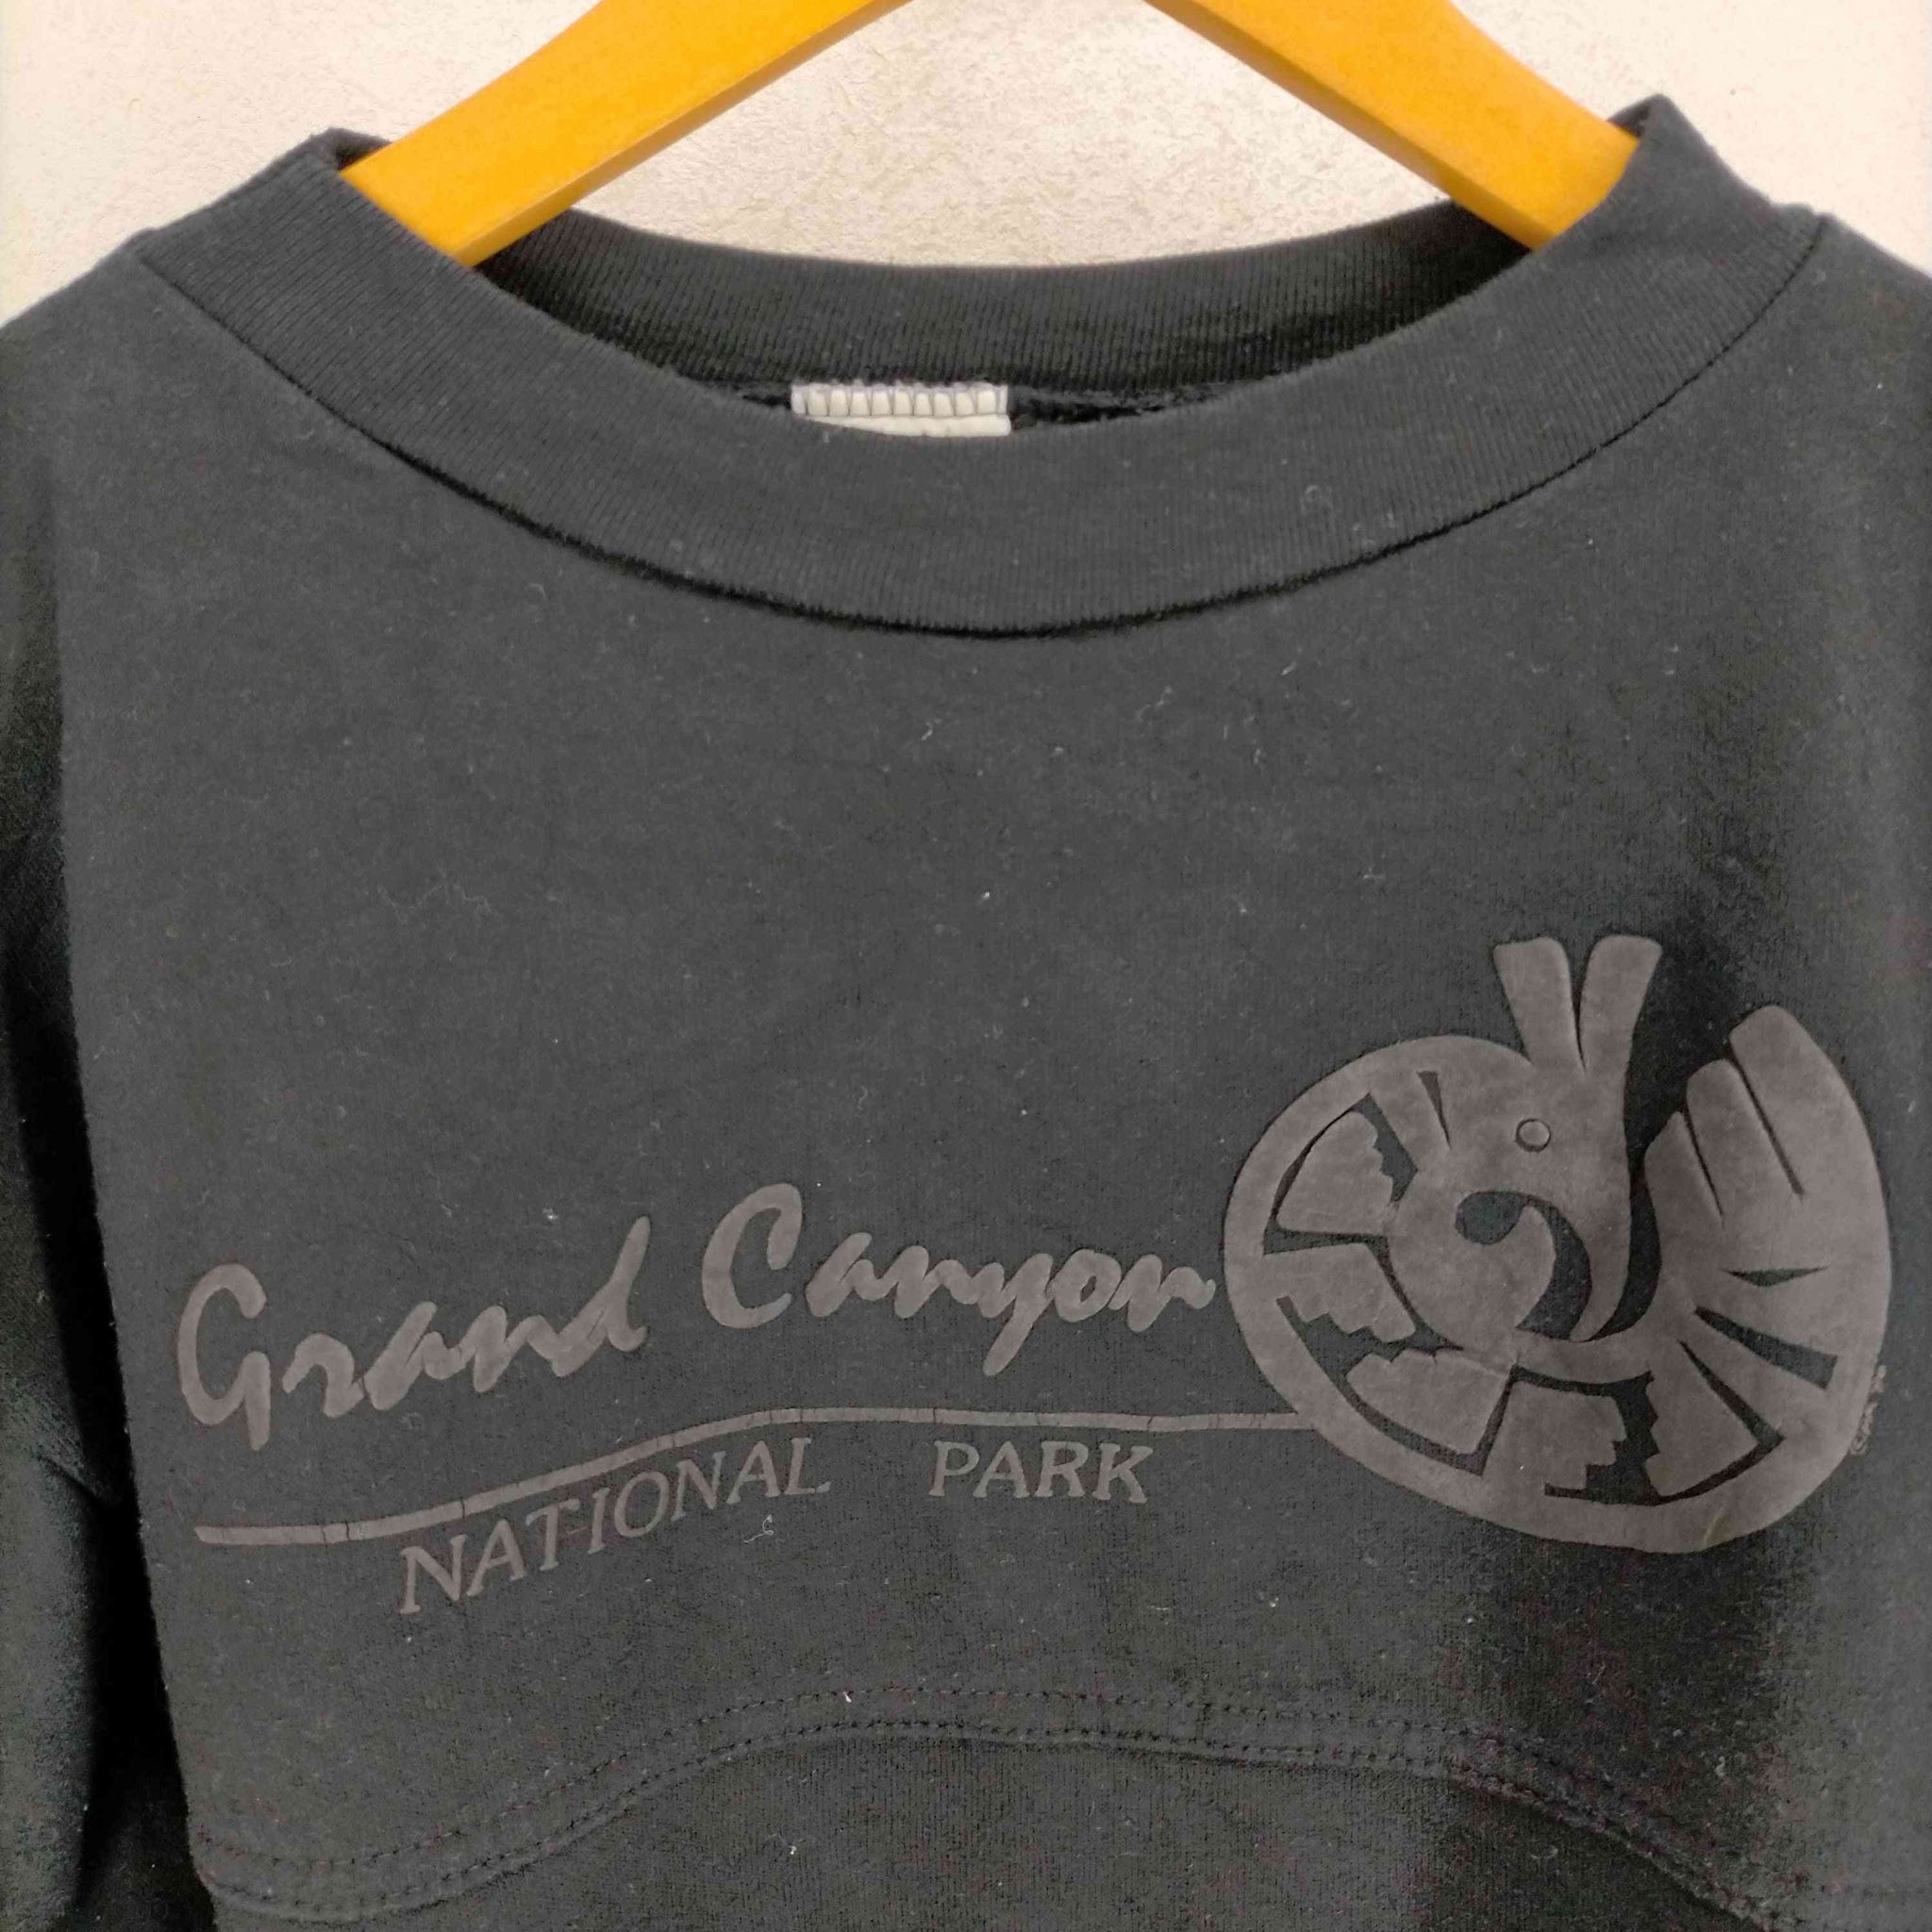 USED古着(ユーズドフルギ)ALERE 発泡プリントスウェット MADE IN USA GRAND CANYON NATIONAL PARK